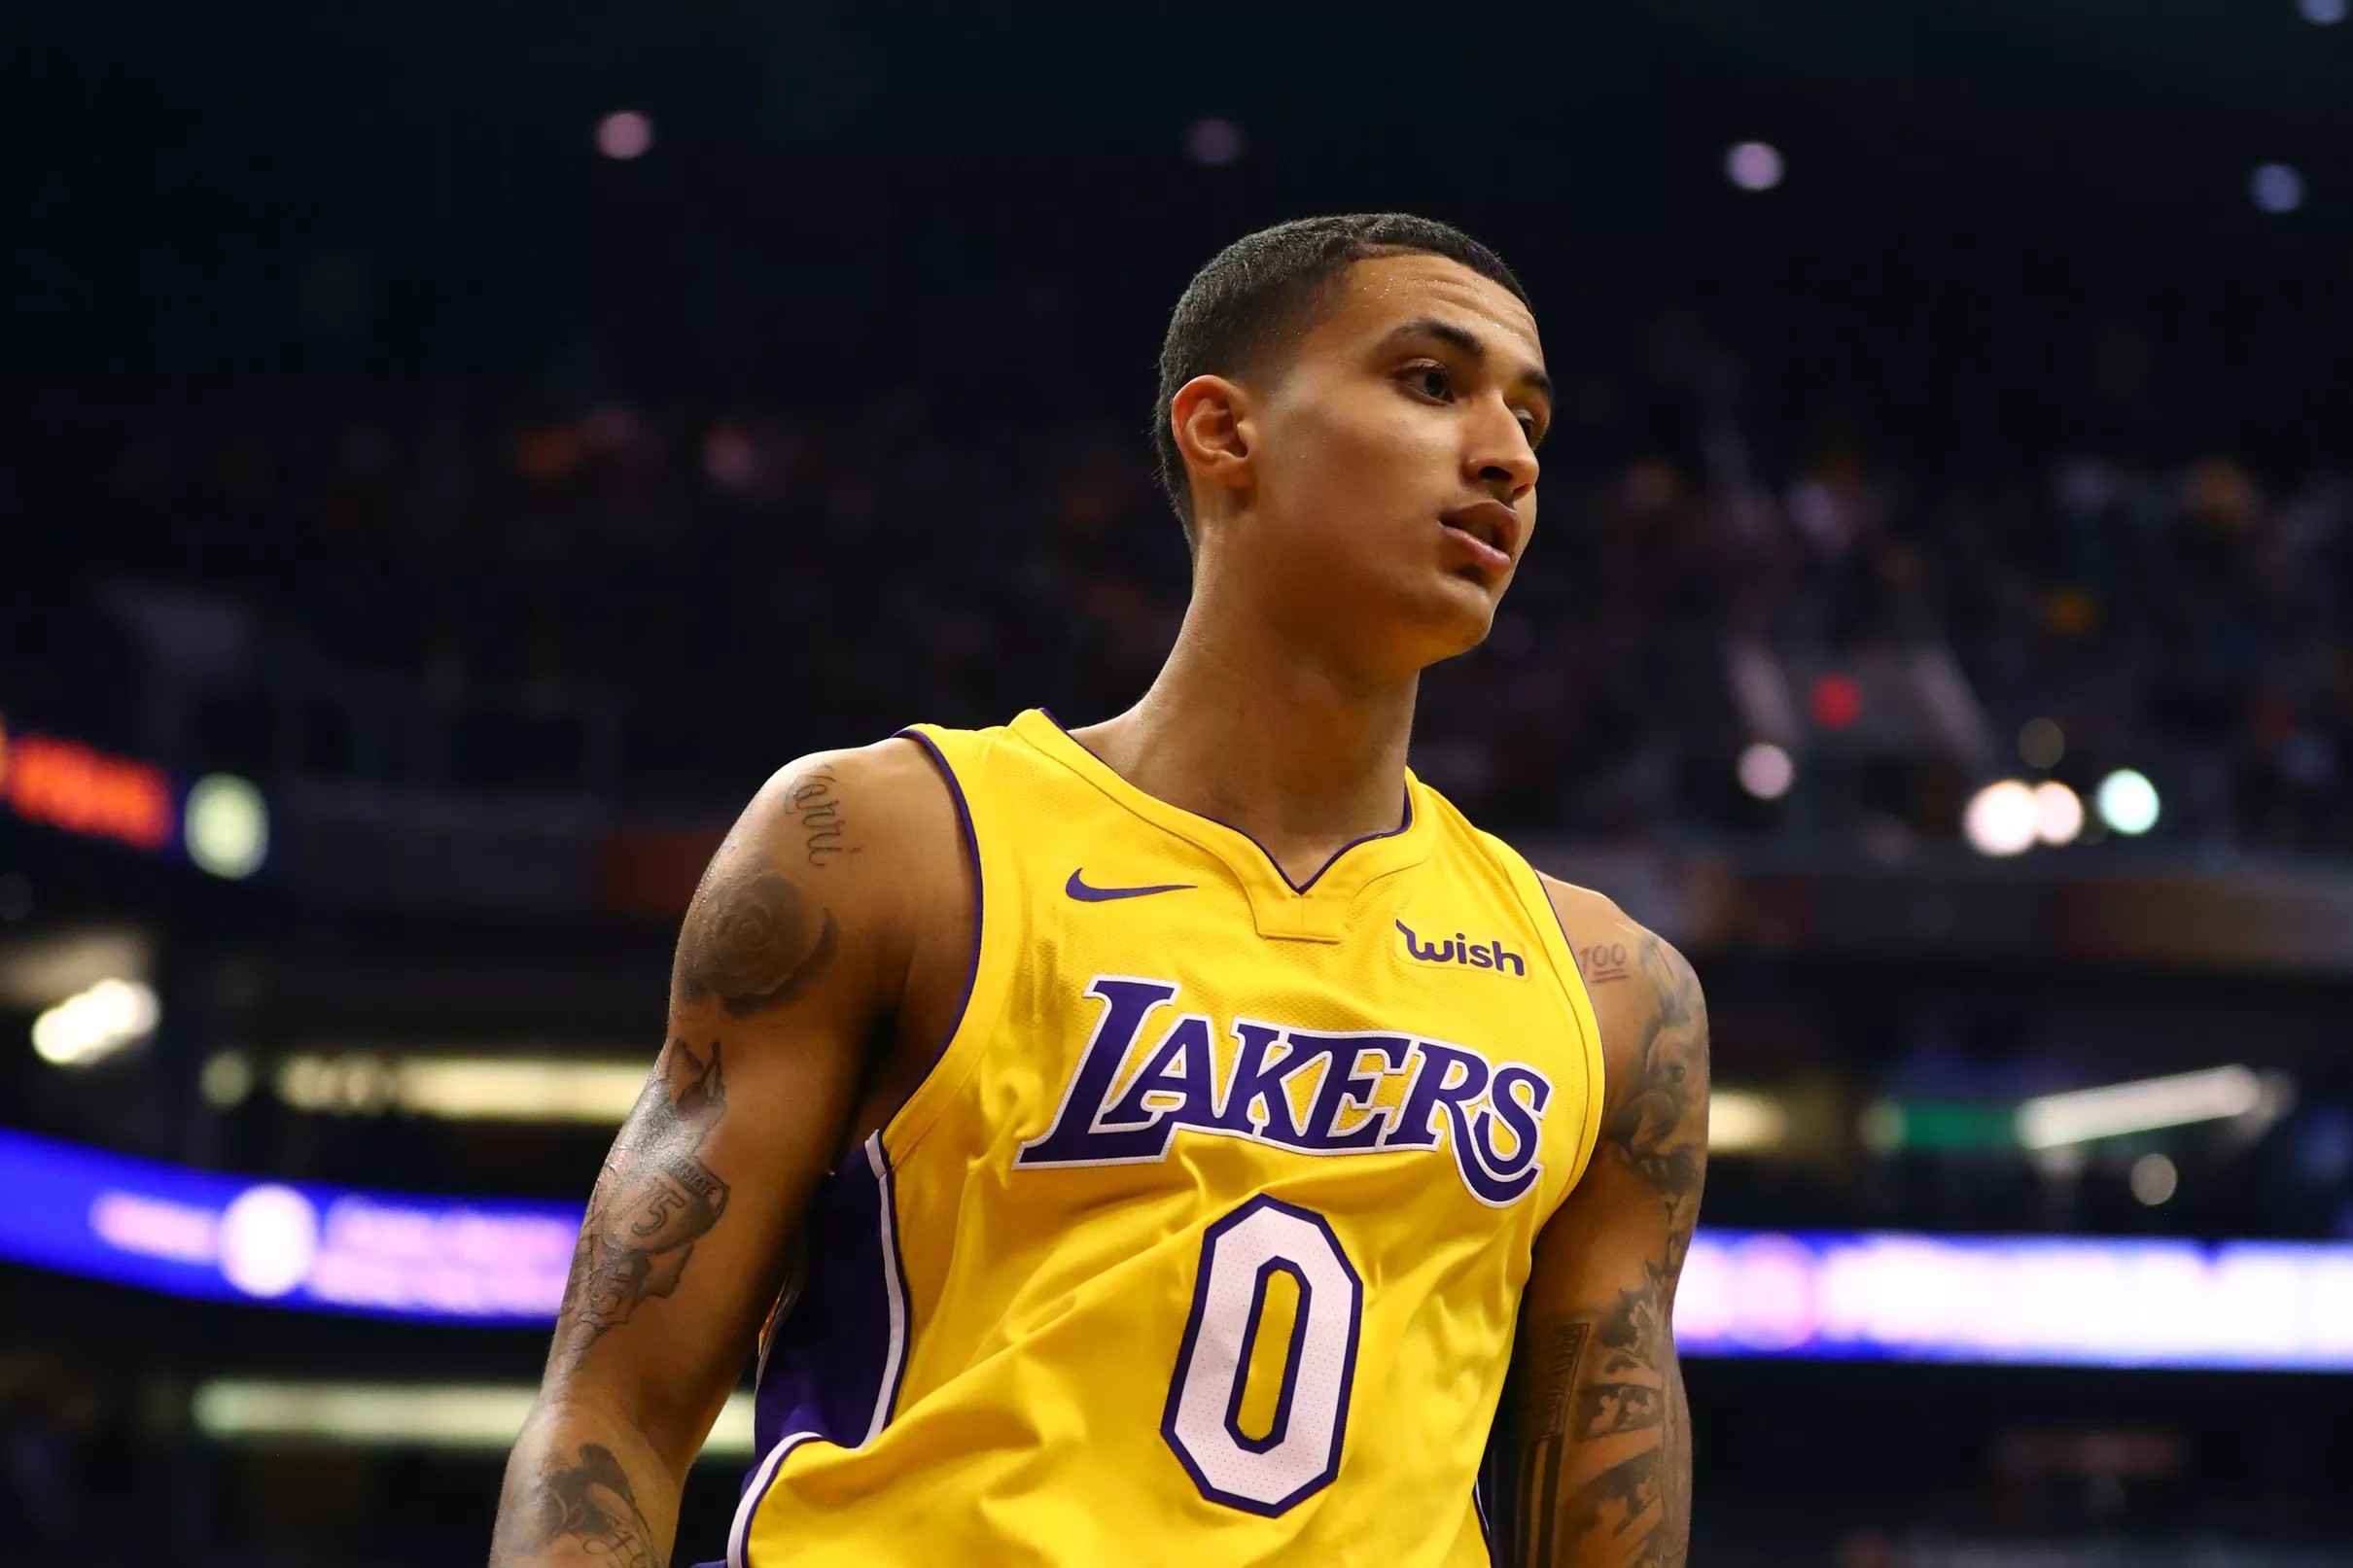 The highlights from Kyle Kuzma’s first career start with the Lakers are fir...